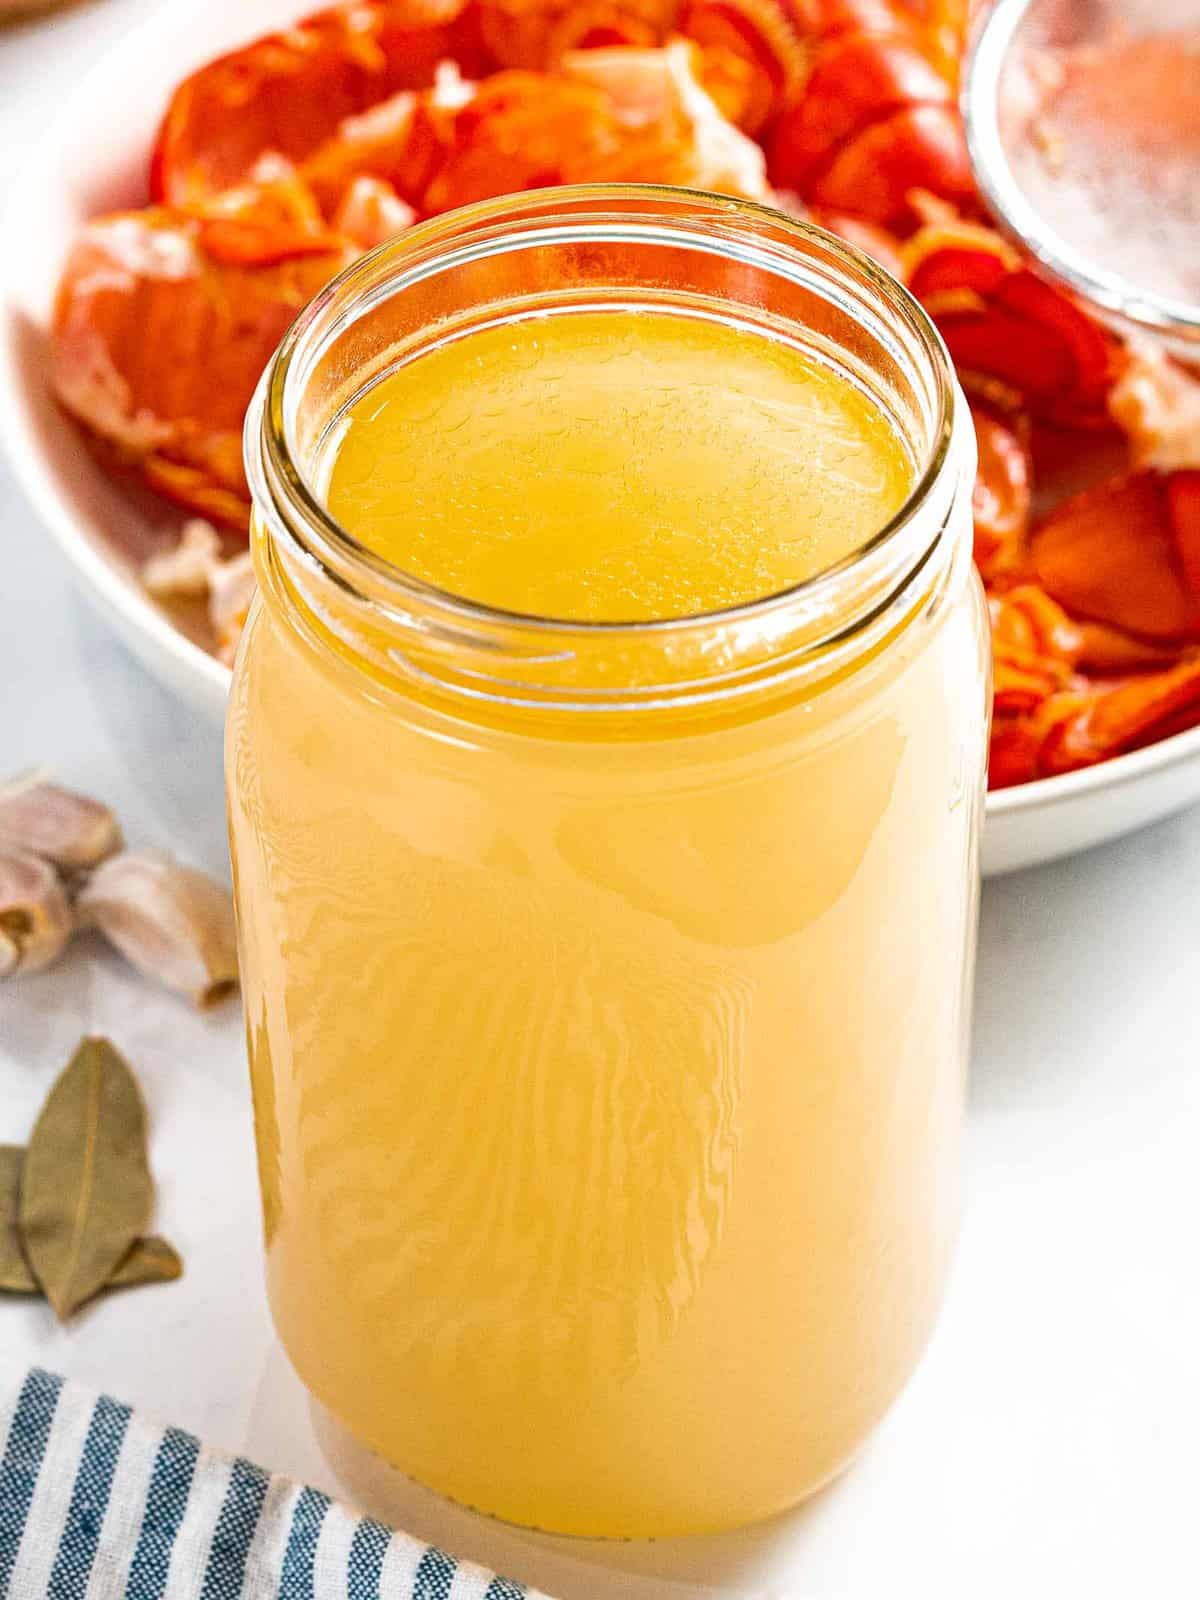 Lobster stock made with lobster shells.